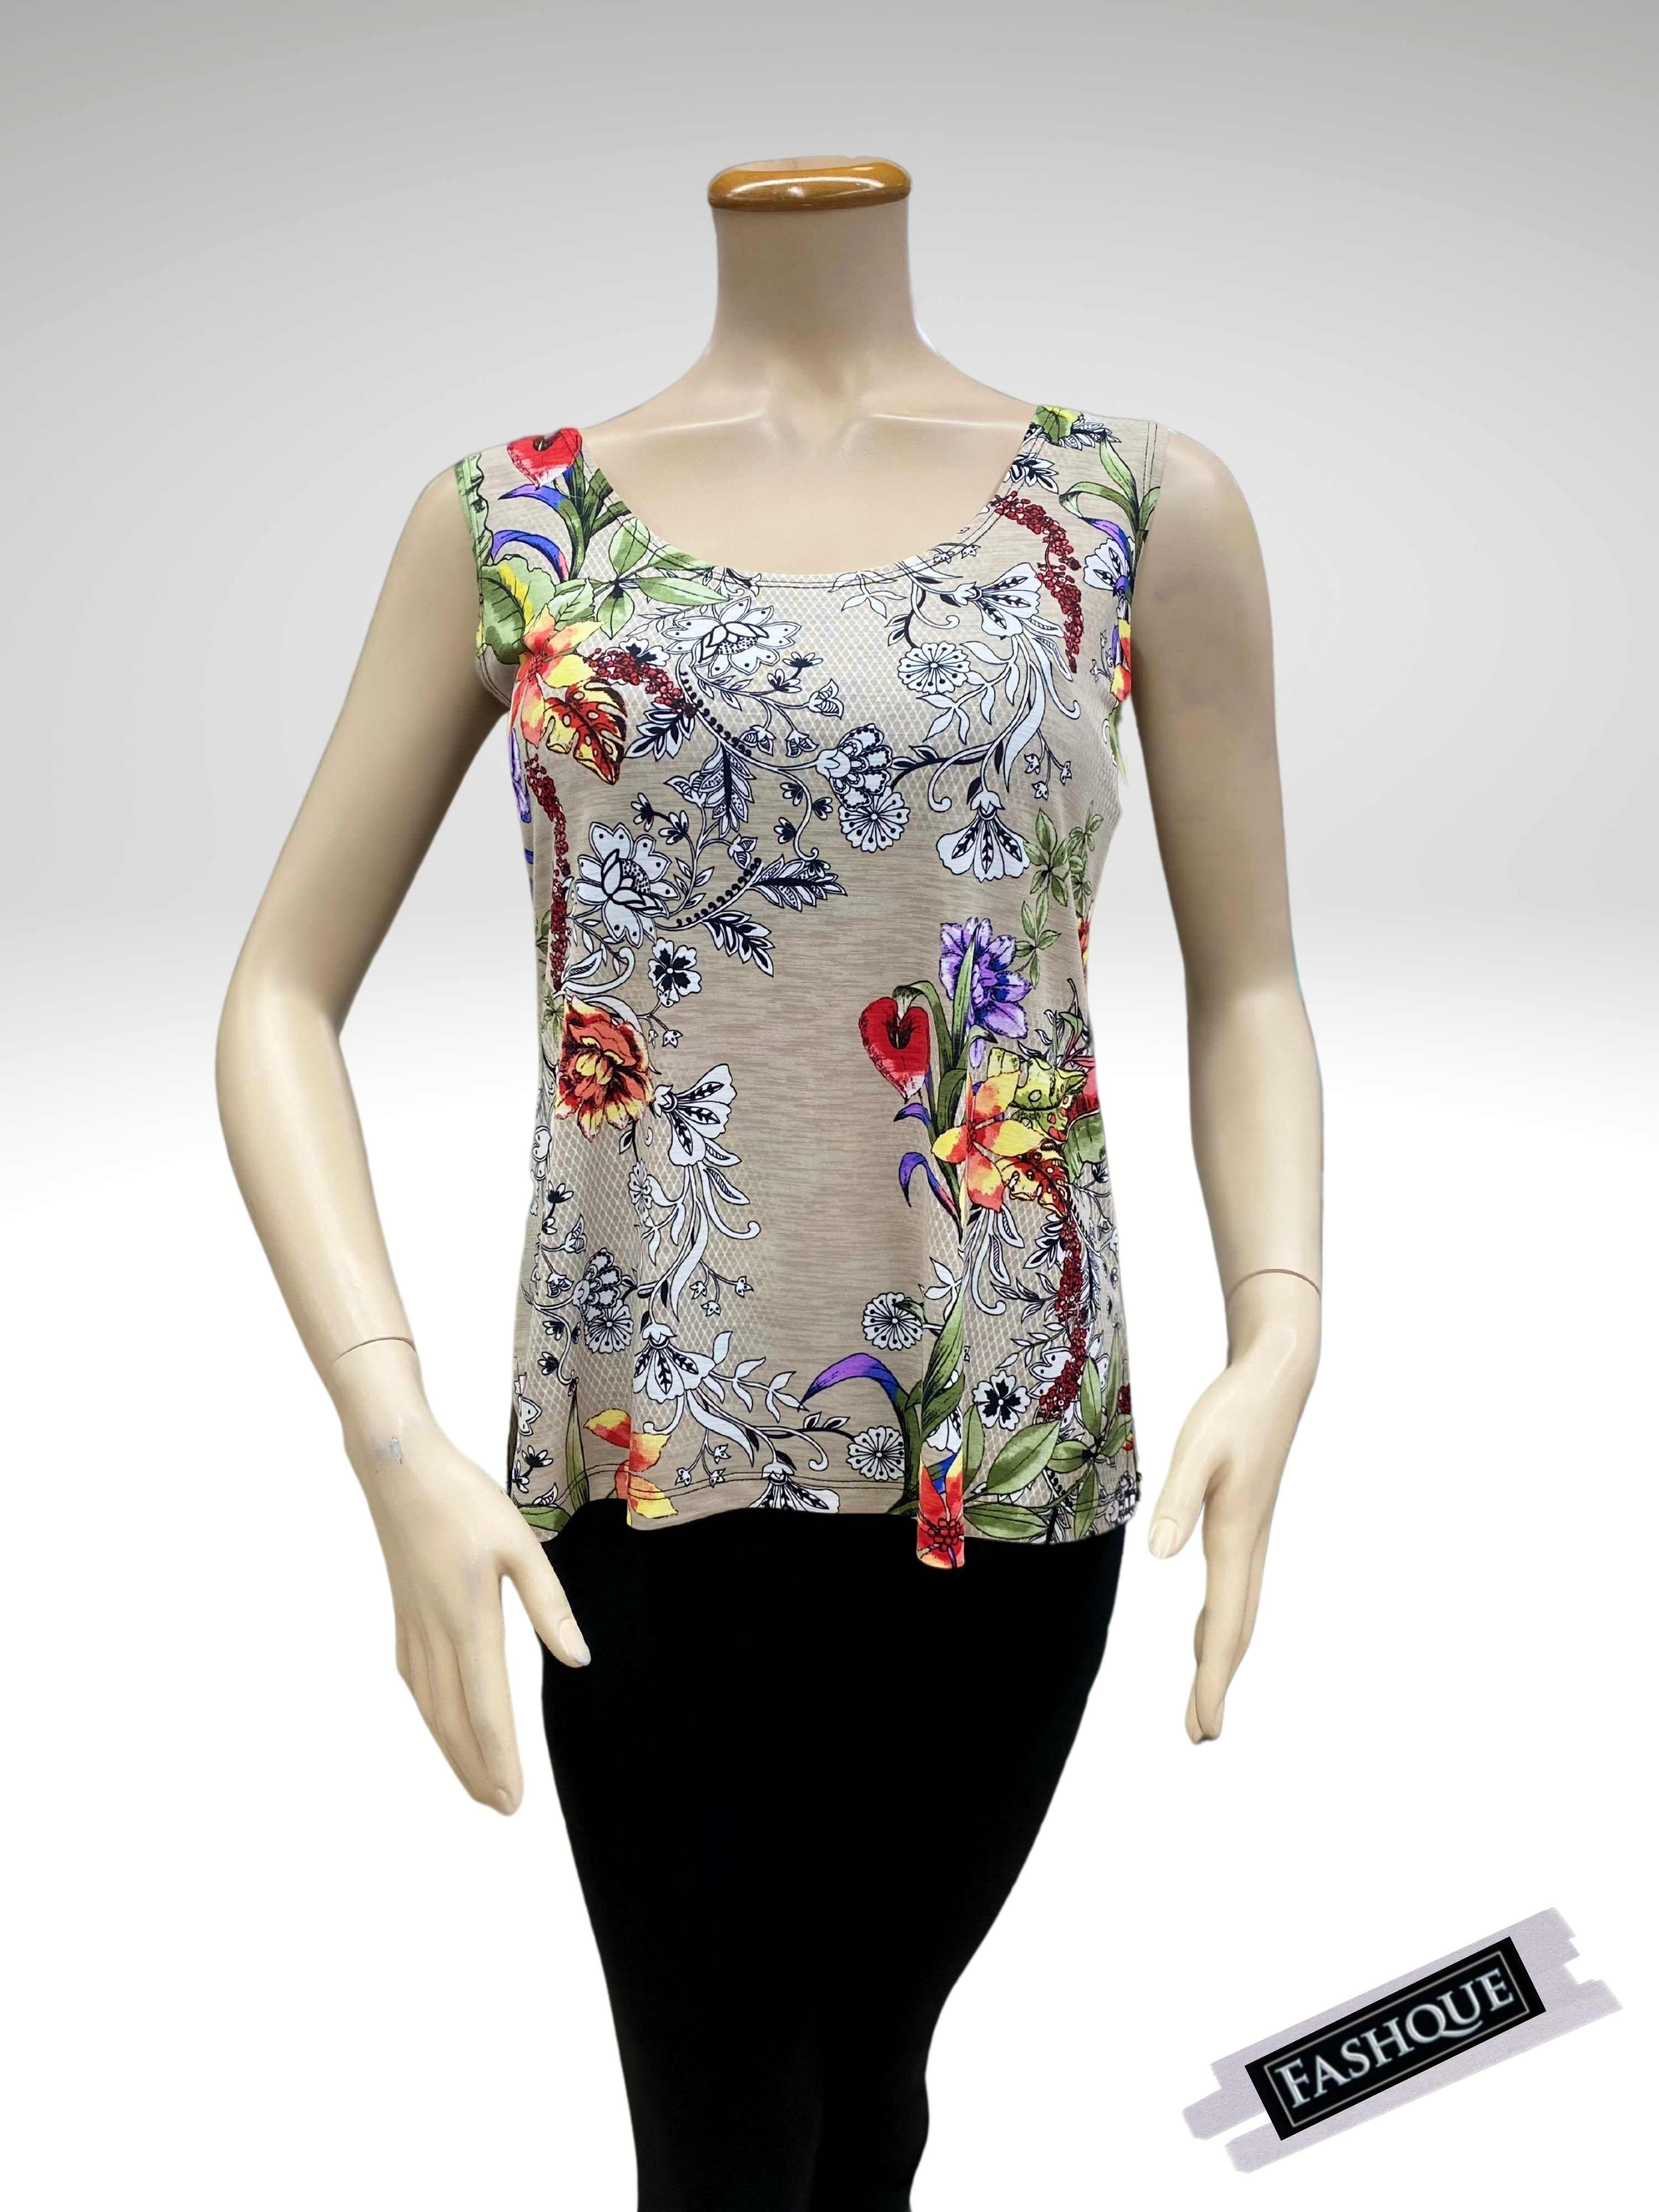 FASHQUE - Round Neck Basic PRINTED Tank Top - T477